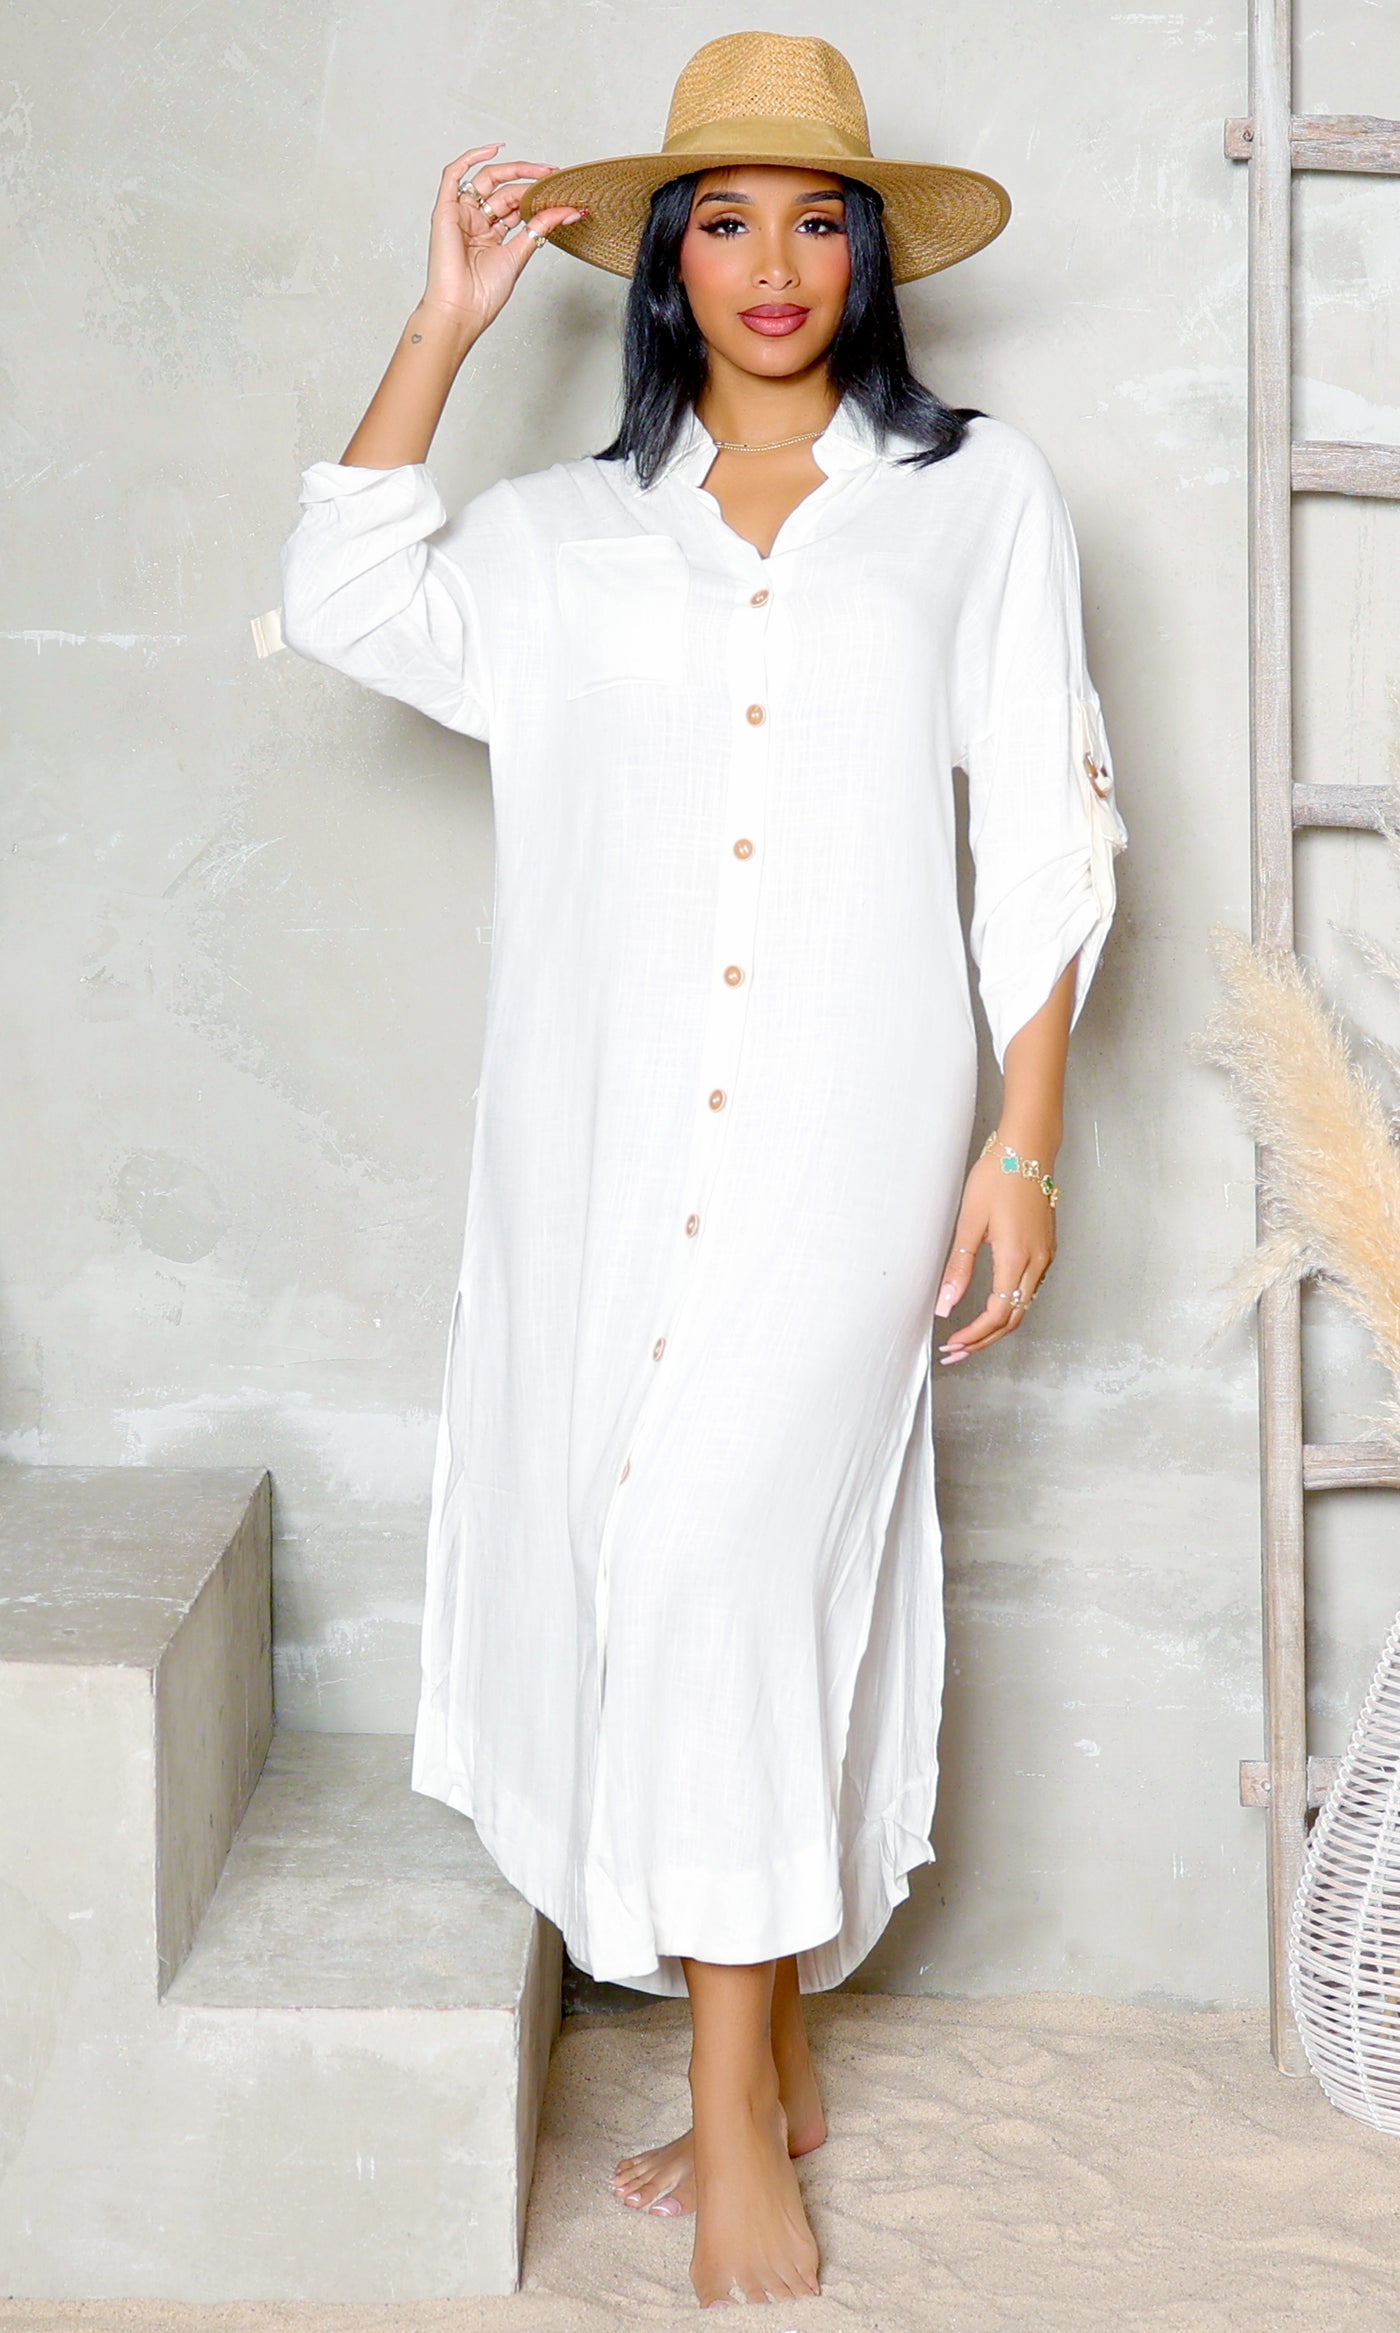 Whispering Breeze  Shirt Dress - White - Cutely Covered